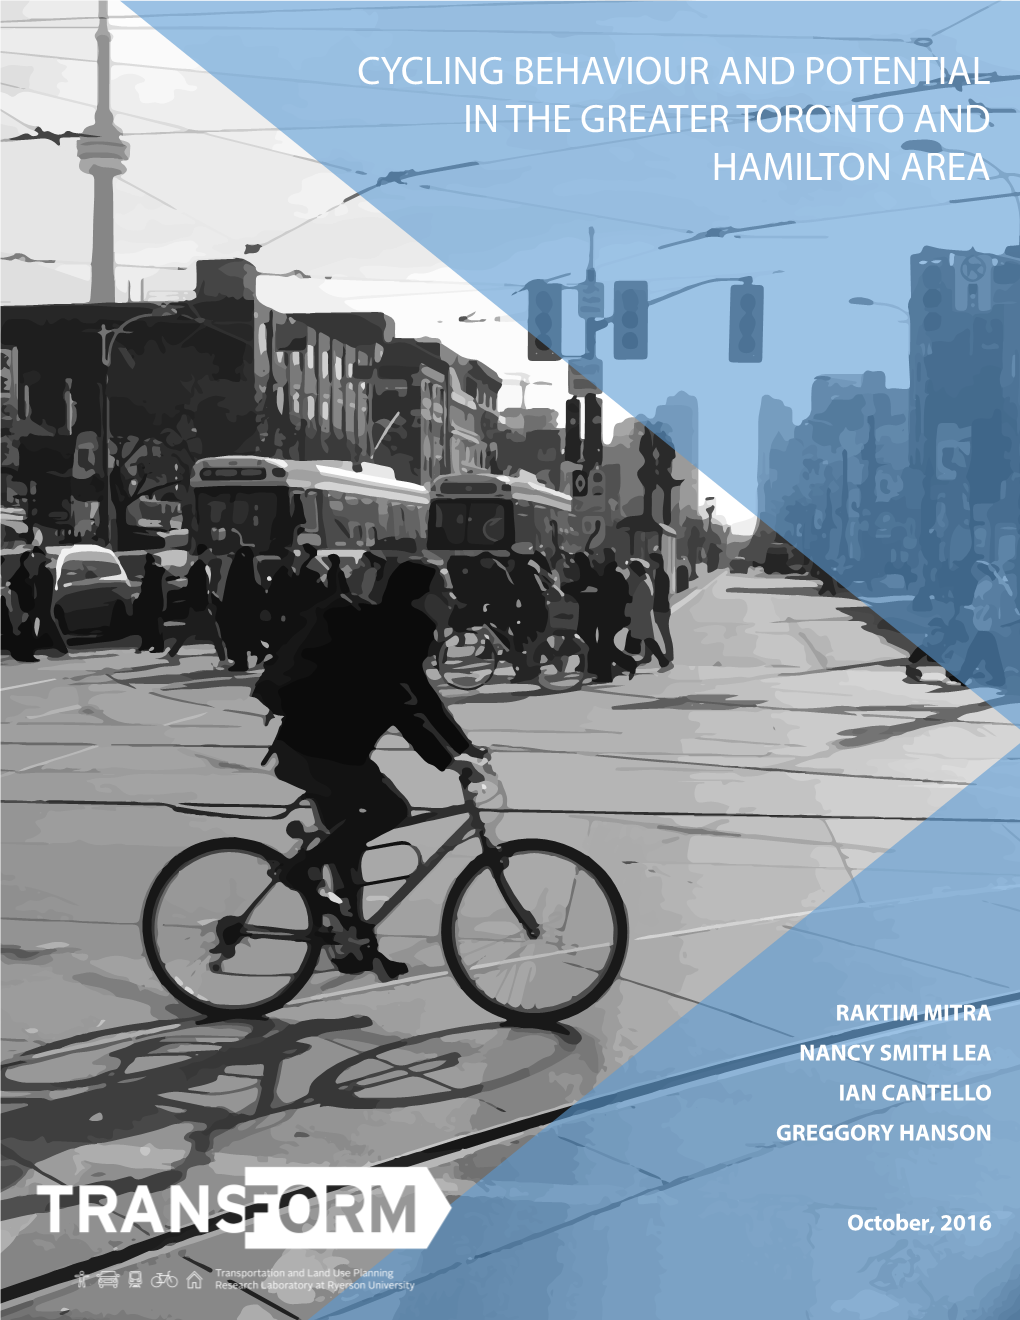 Cycling Behaviour and Potential in the Greater Toronto and Hamilton Area